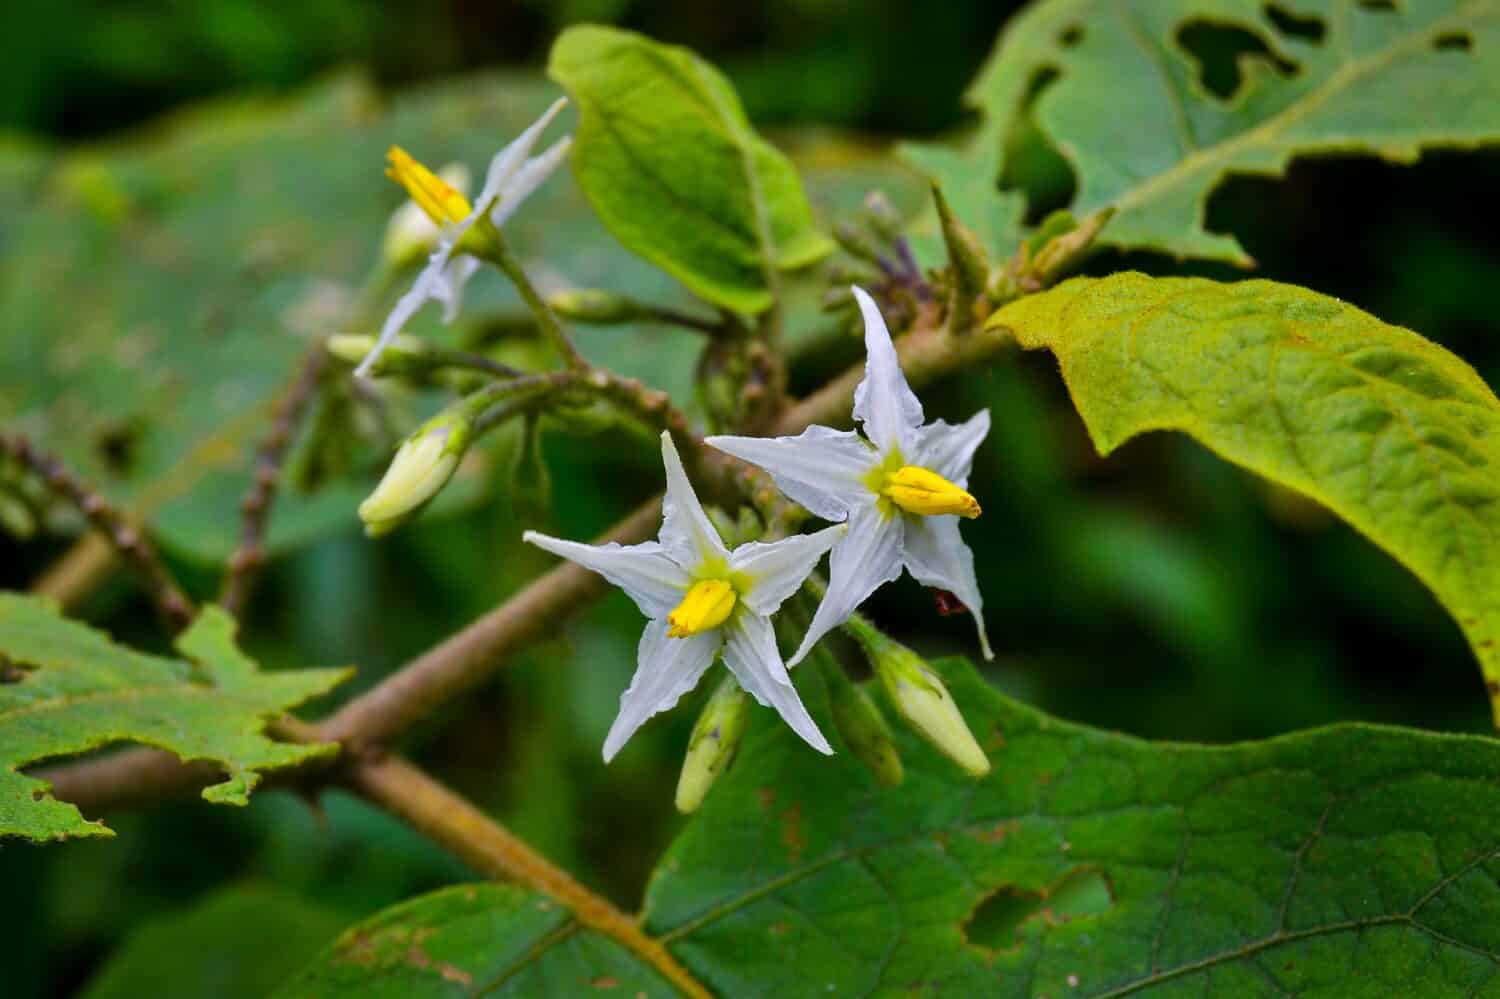 Solanum carolinense, Carolina horse nettle, is not a true nettle, but a member of the Solanaceae, or nightshade family. It is a perennial herbaceous plant, native to the southeastern United States